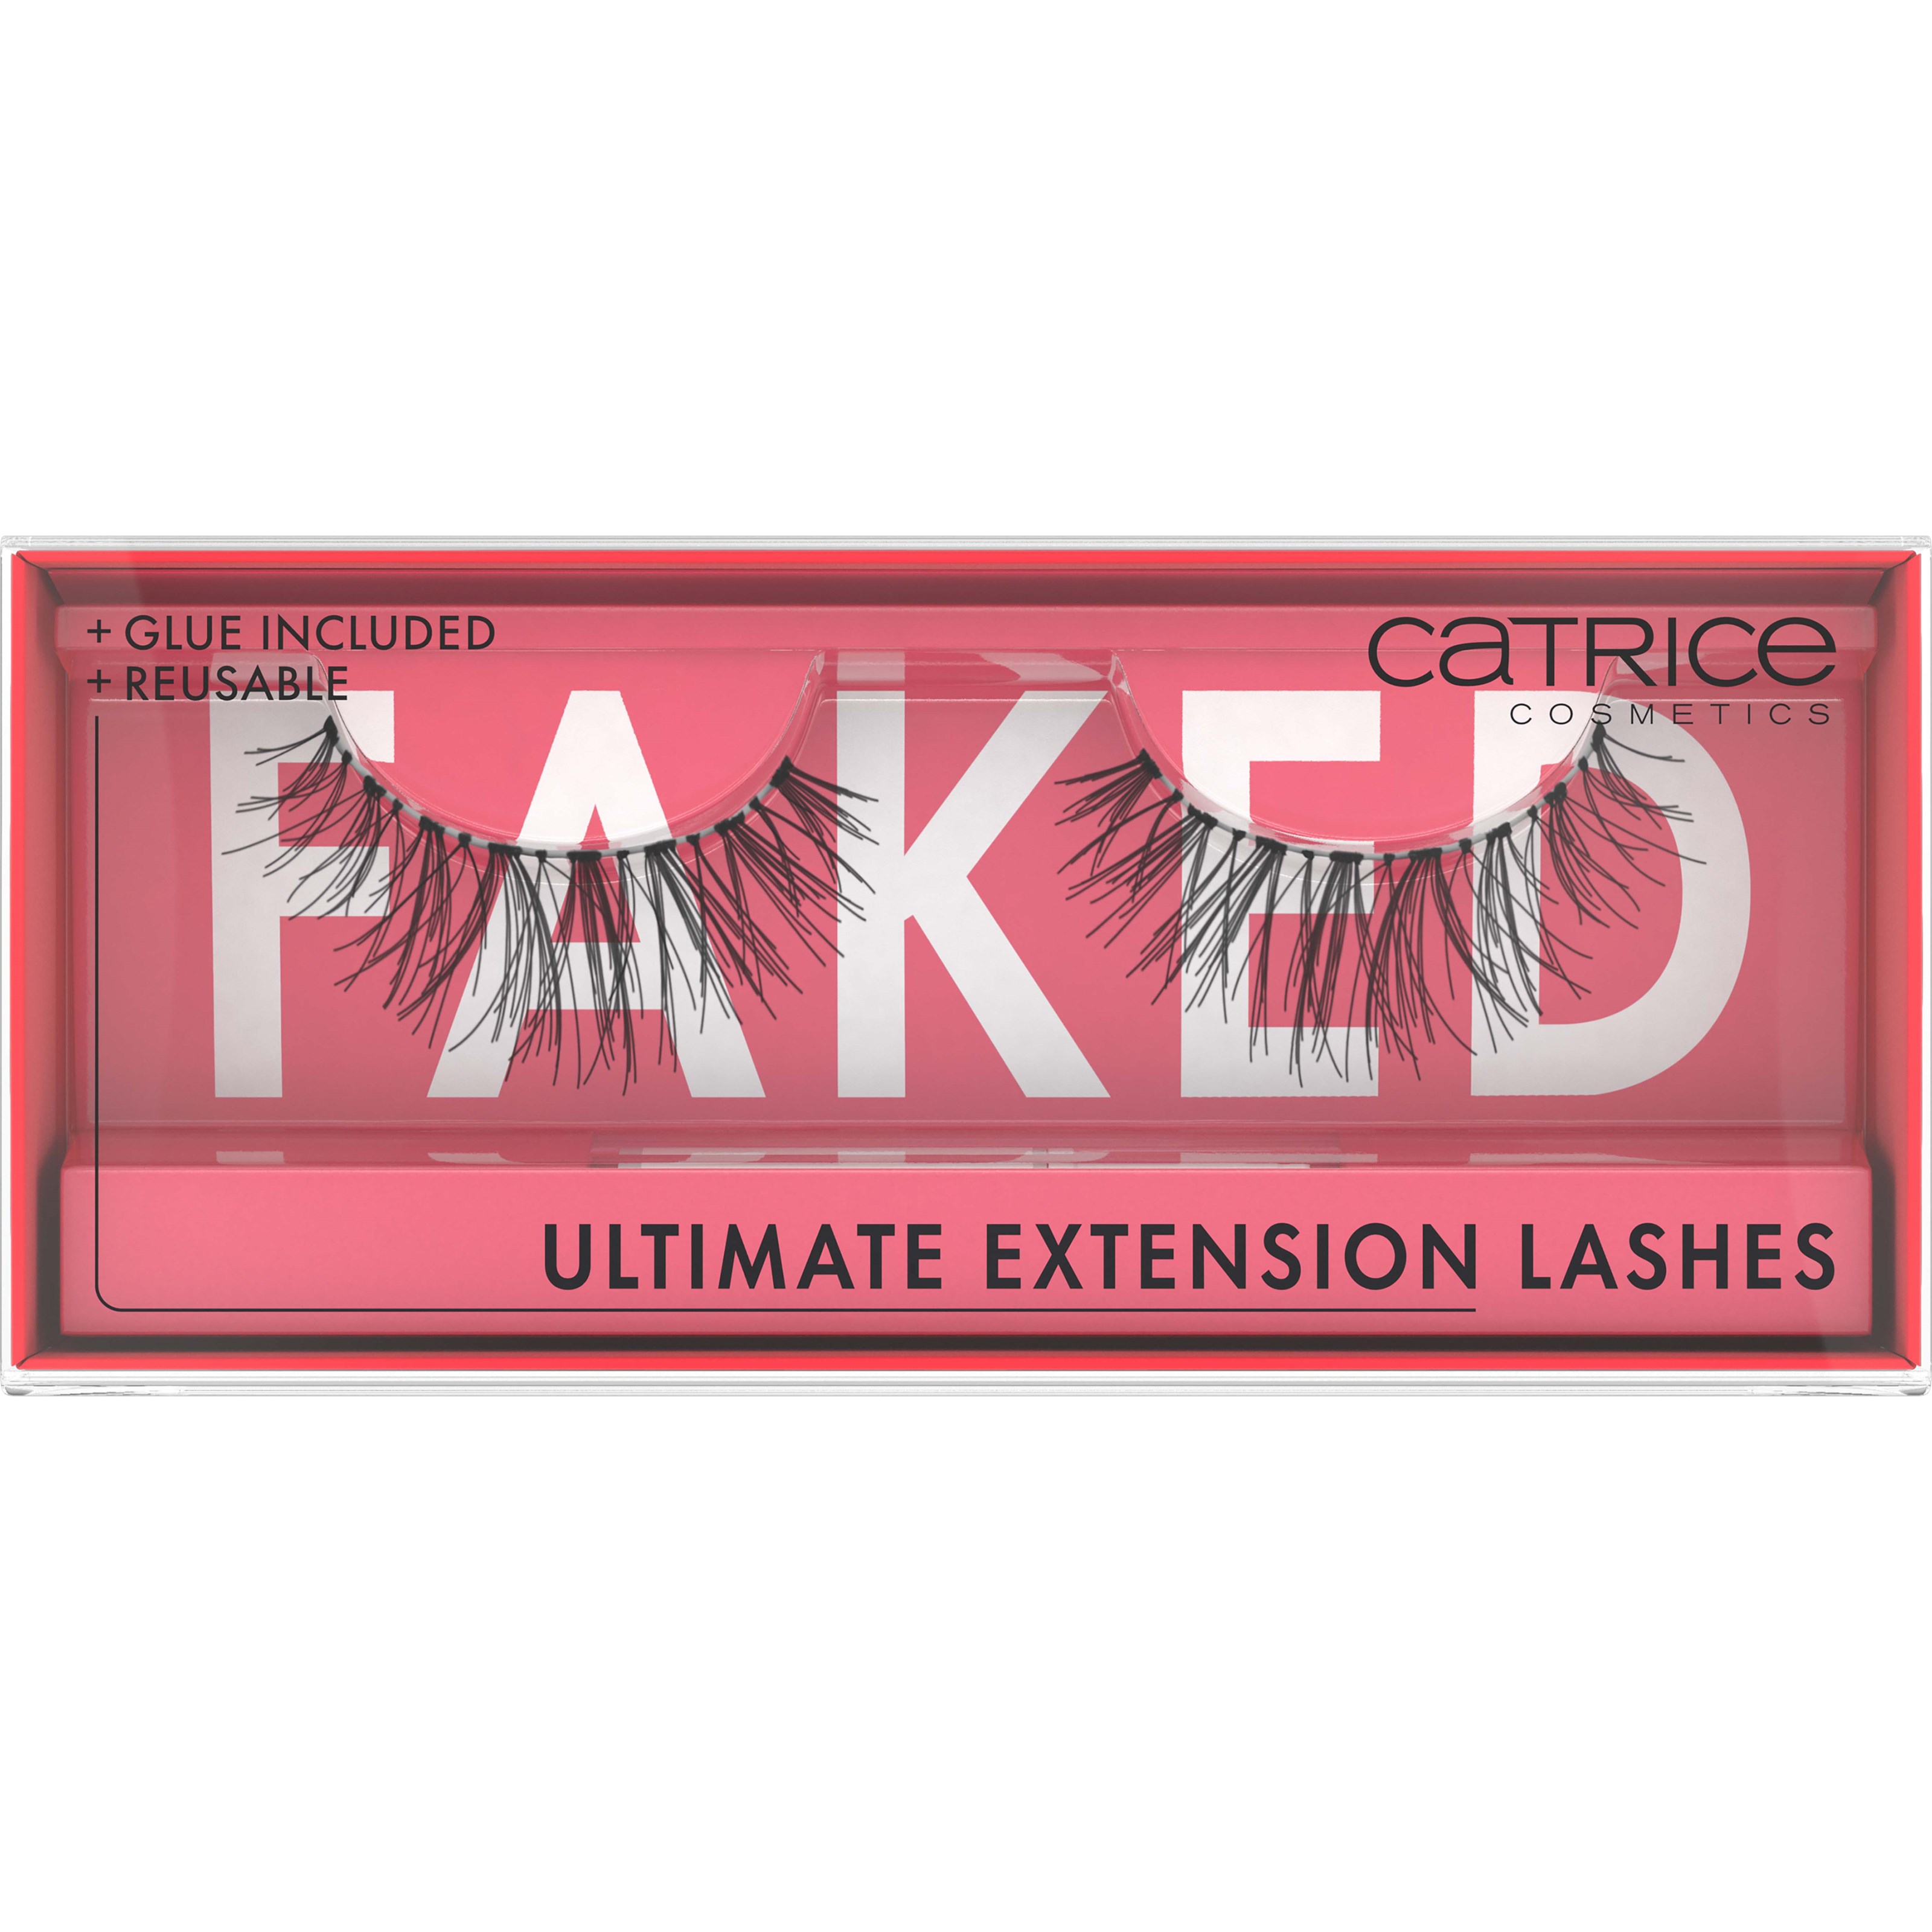 Läs mer om Catrice Faked Ultimate Extension Lashes